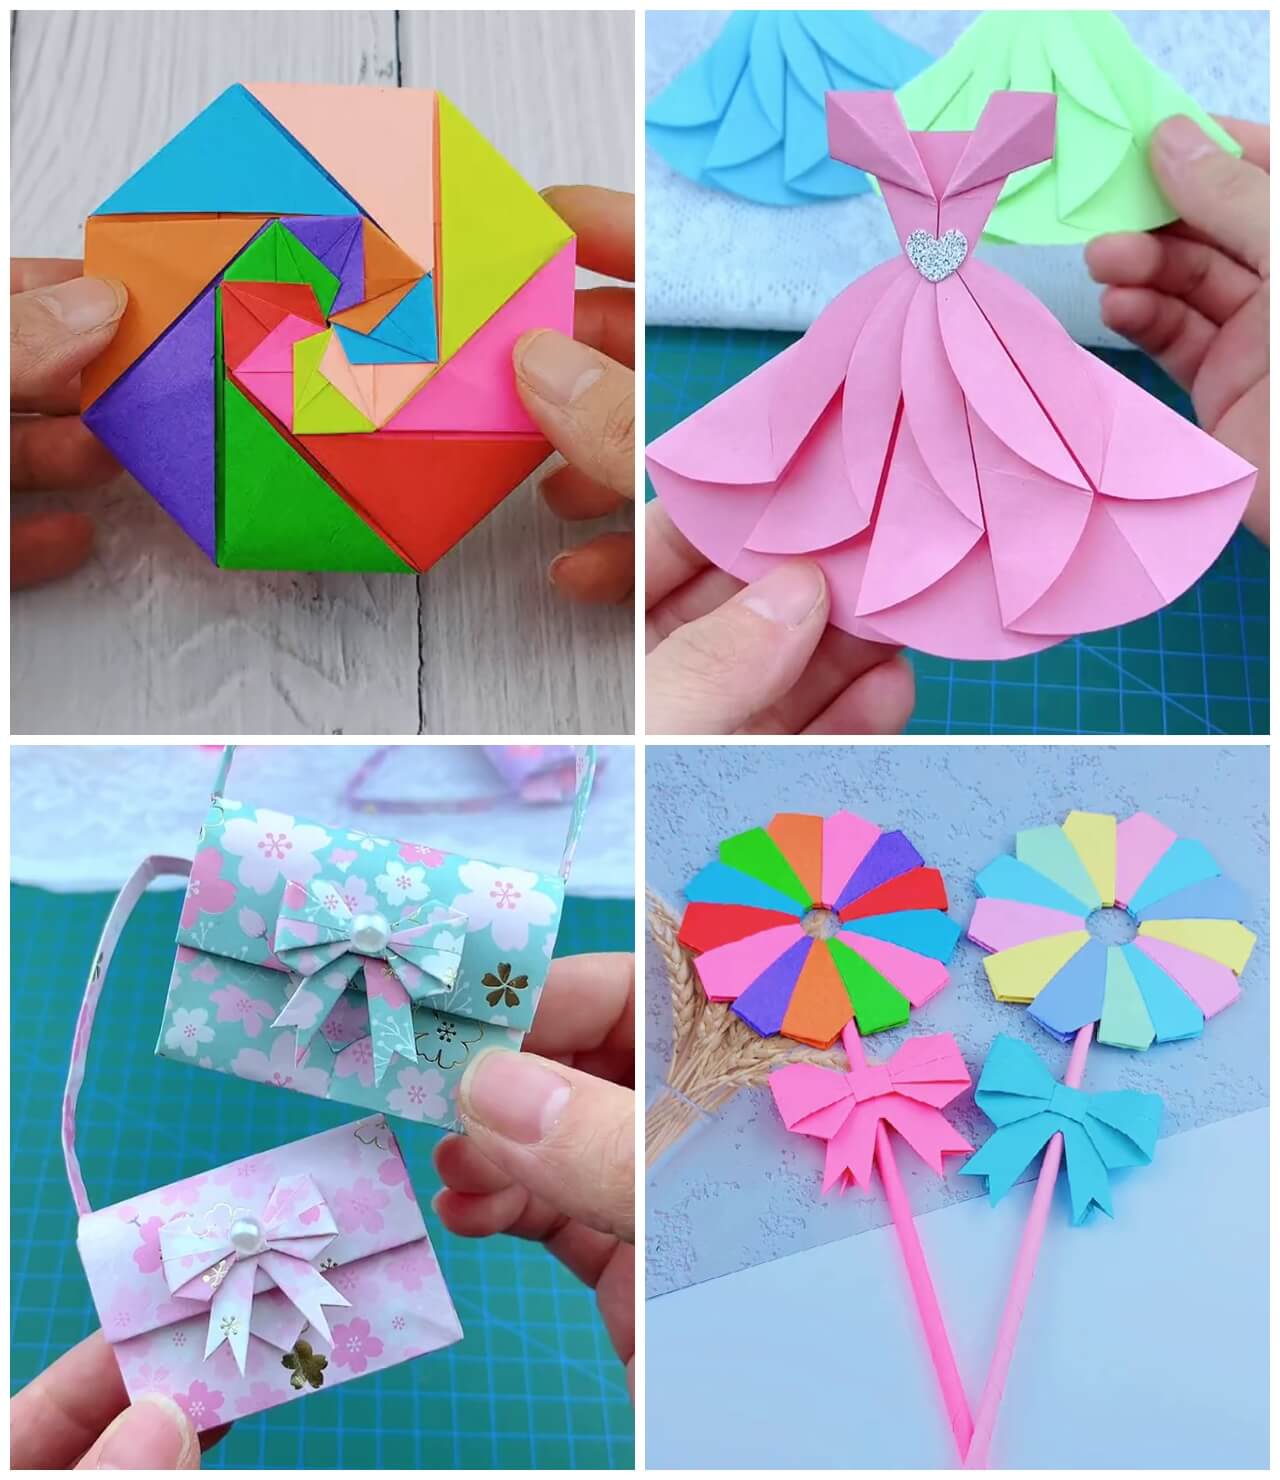 Cool Art & Craft Ideas for Kids of All Ages - Kids Art & Craft